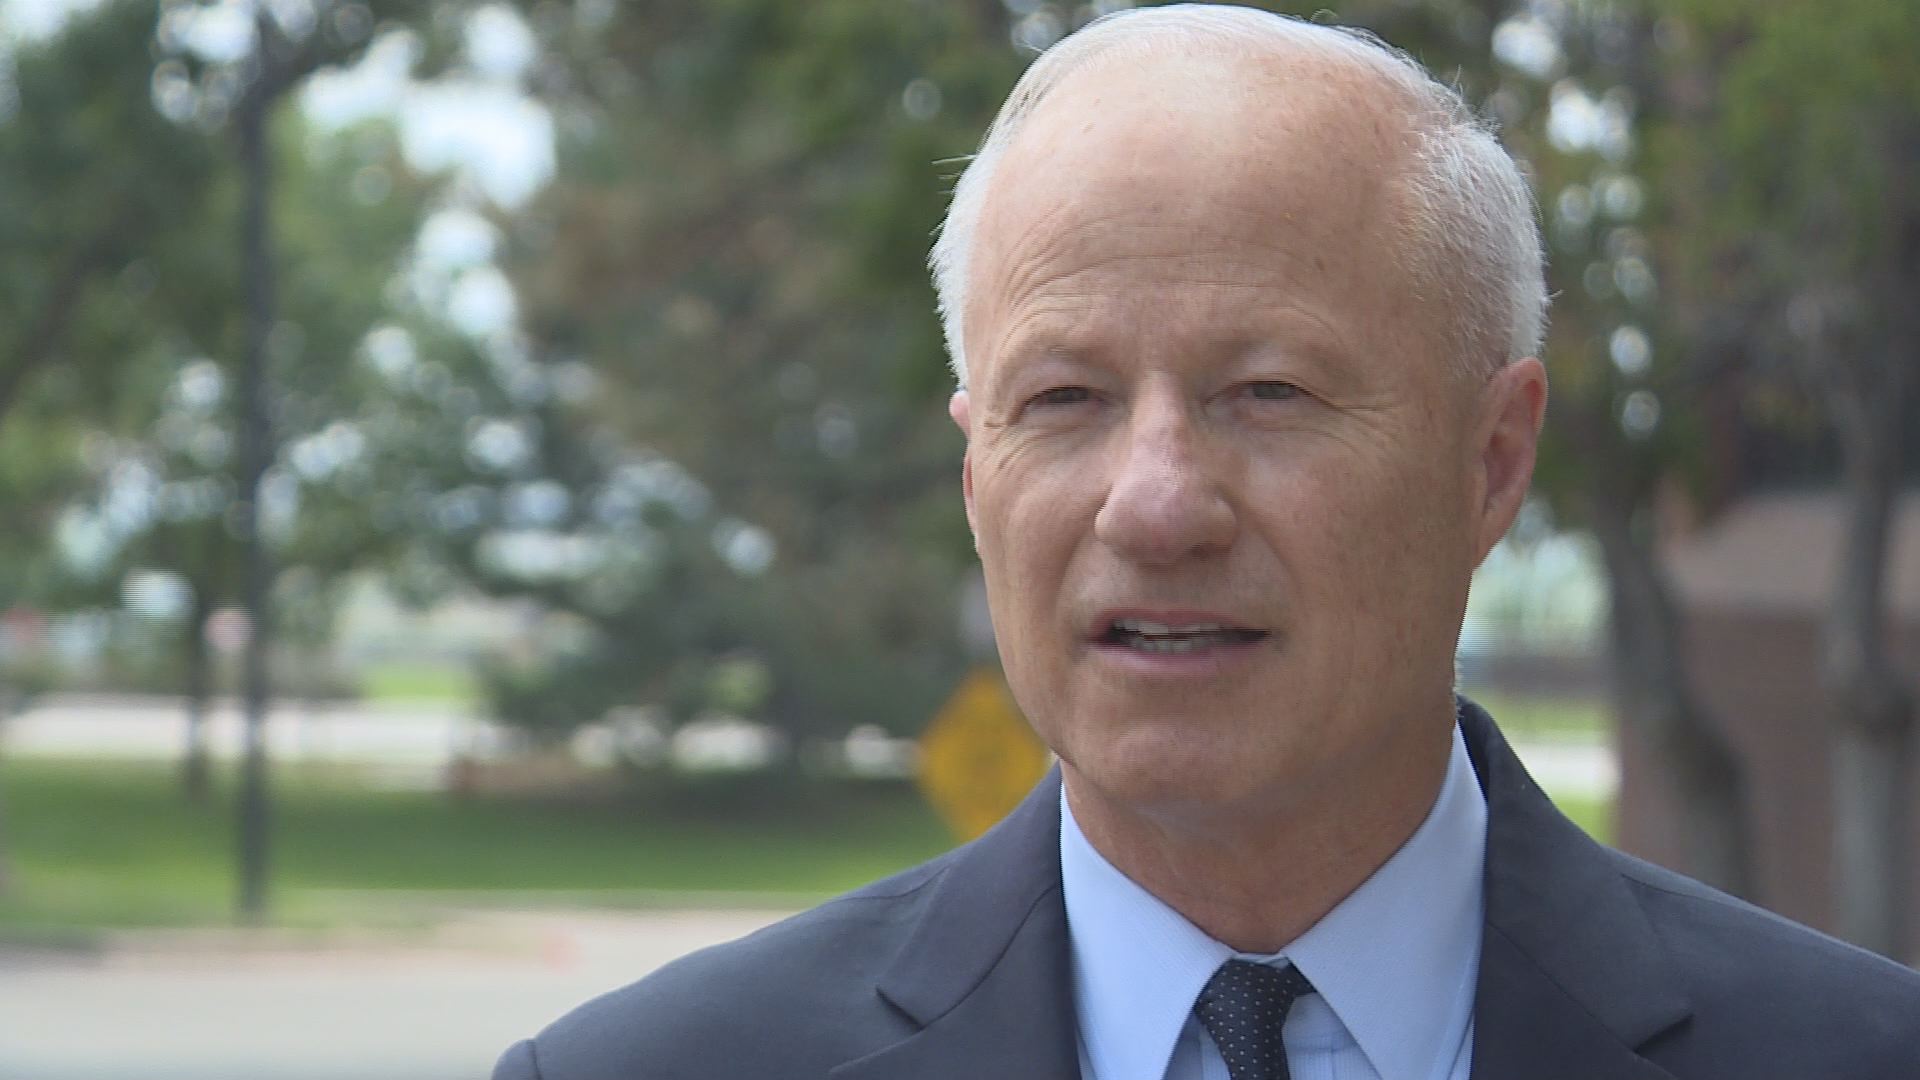 Coffman, who expects Trump to end DACA, wants to force vote to ...